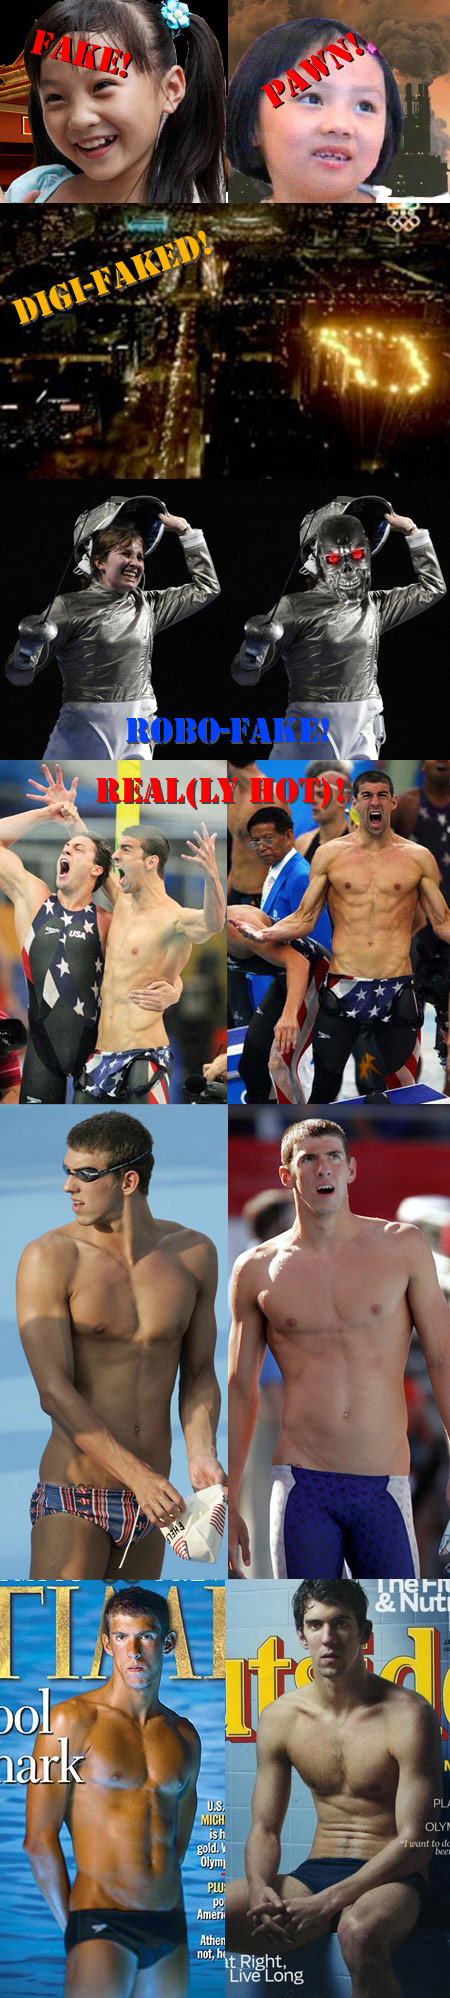 In a world of lies, Phelps is all we have left